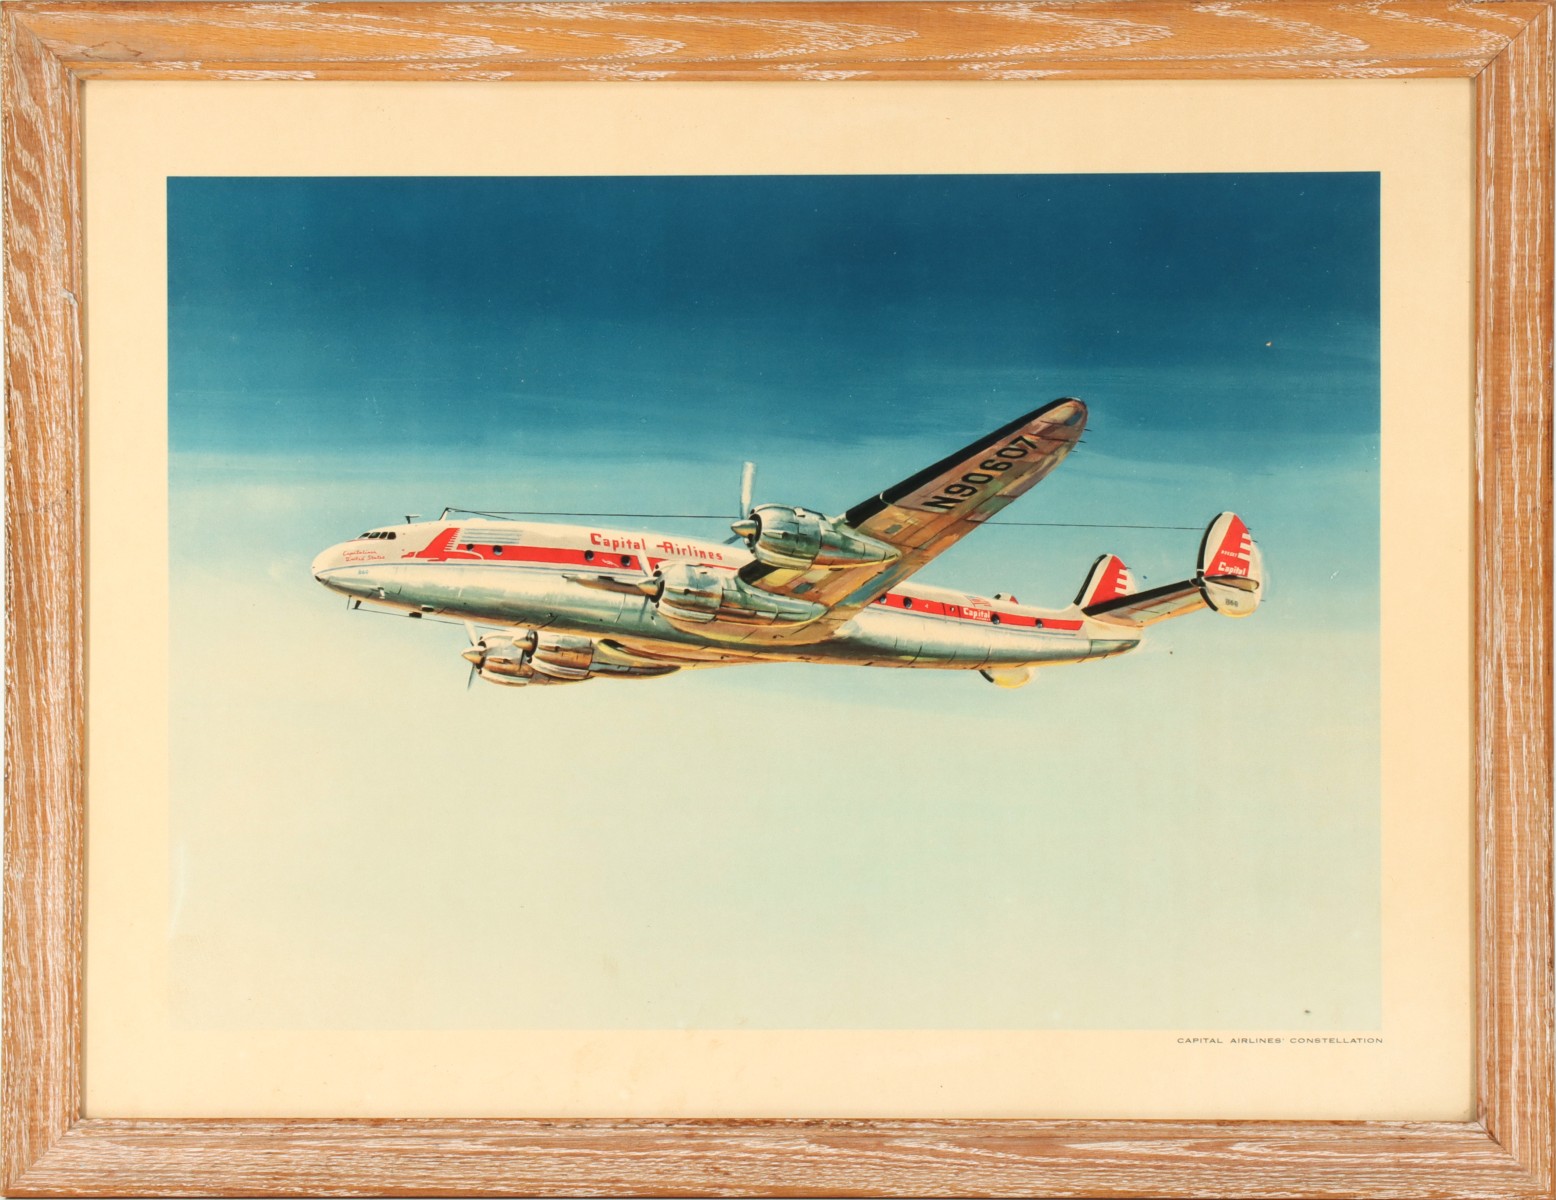 A CAPITAL AIRLINES CONSTELLATION ADVERTISING PRINT